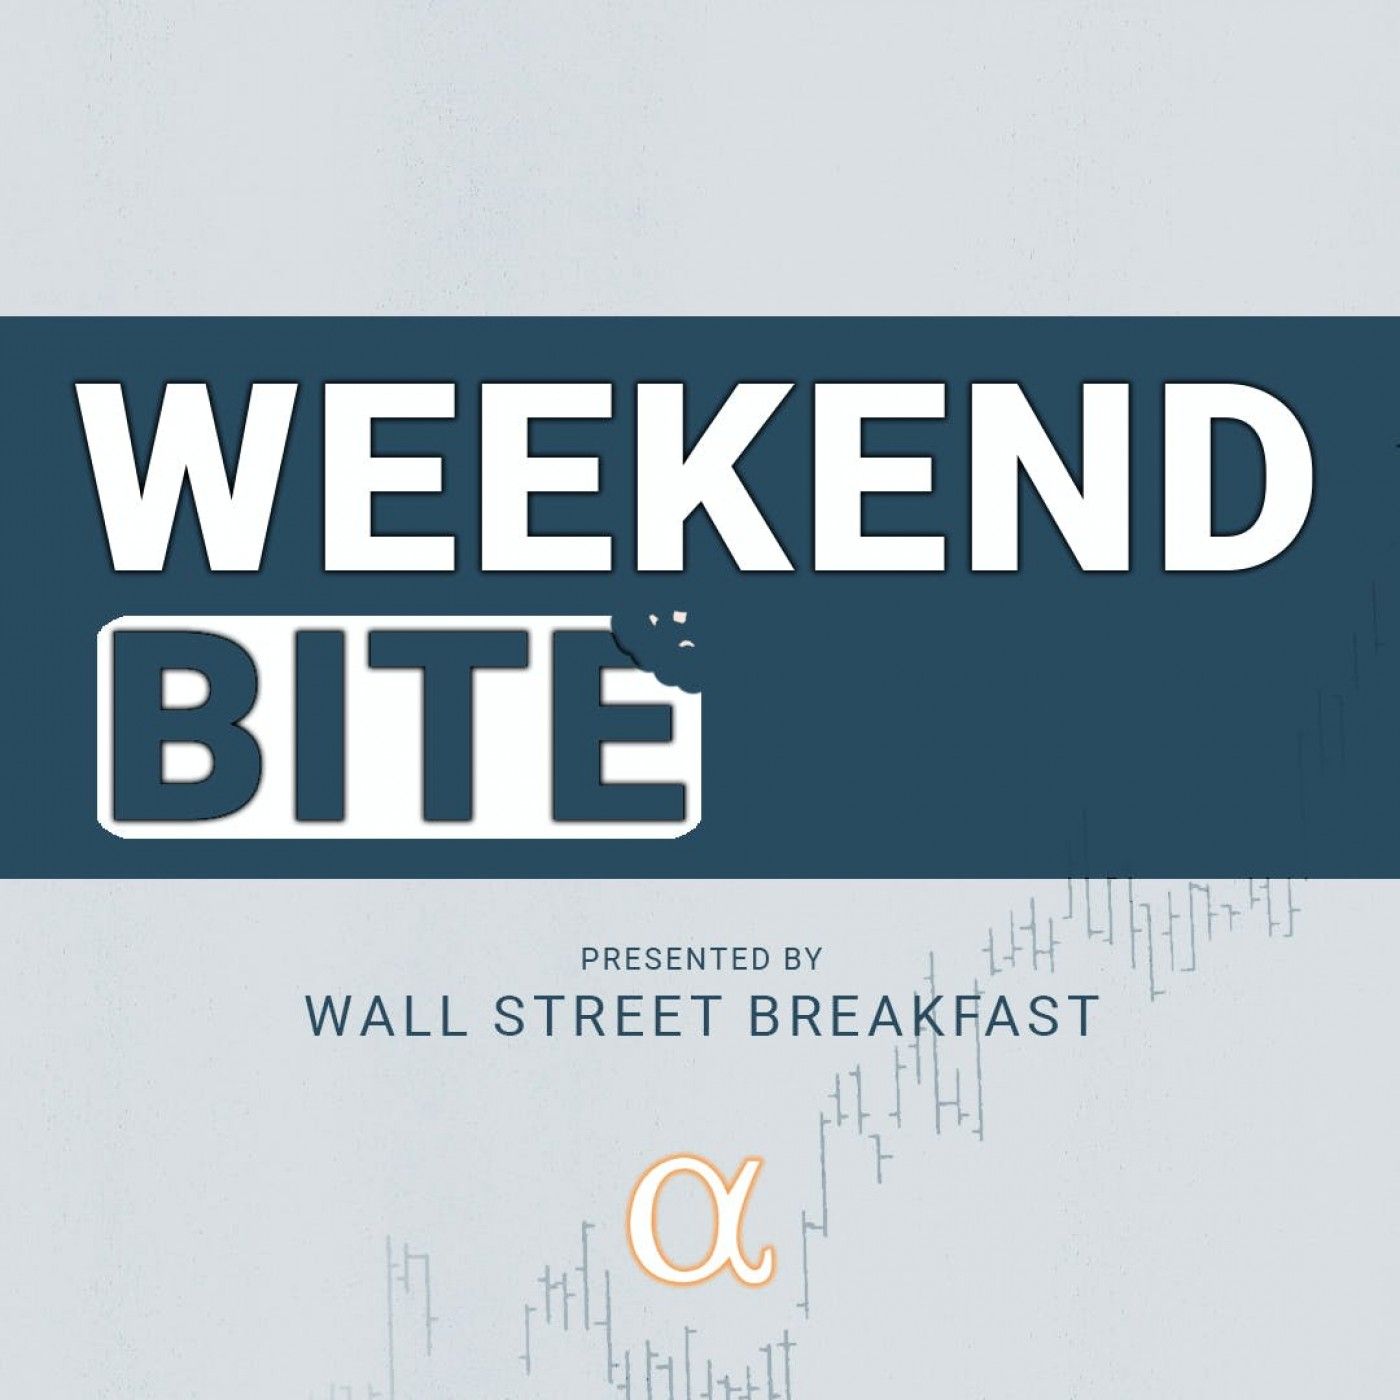 WSB's The Weekend Bite: Investing In High Yielding Dividend Stocks And Luxury Real Estate w/ Samuel Smith and William Huston